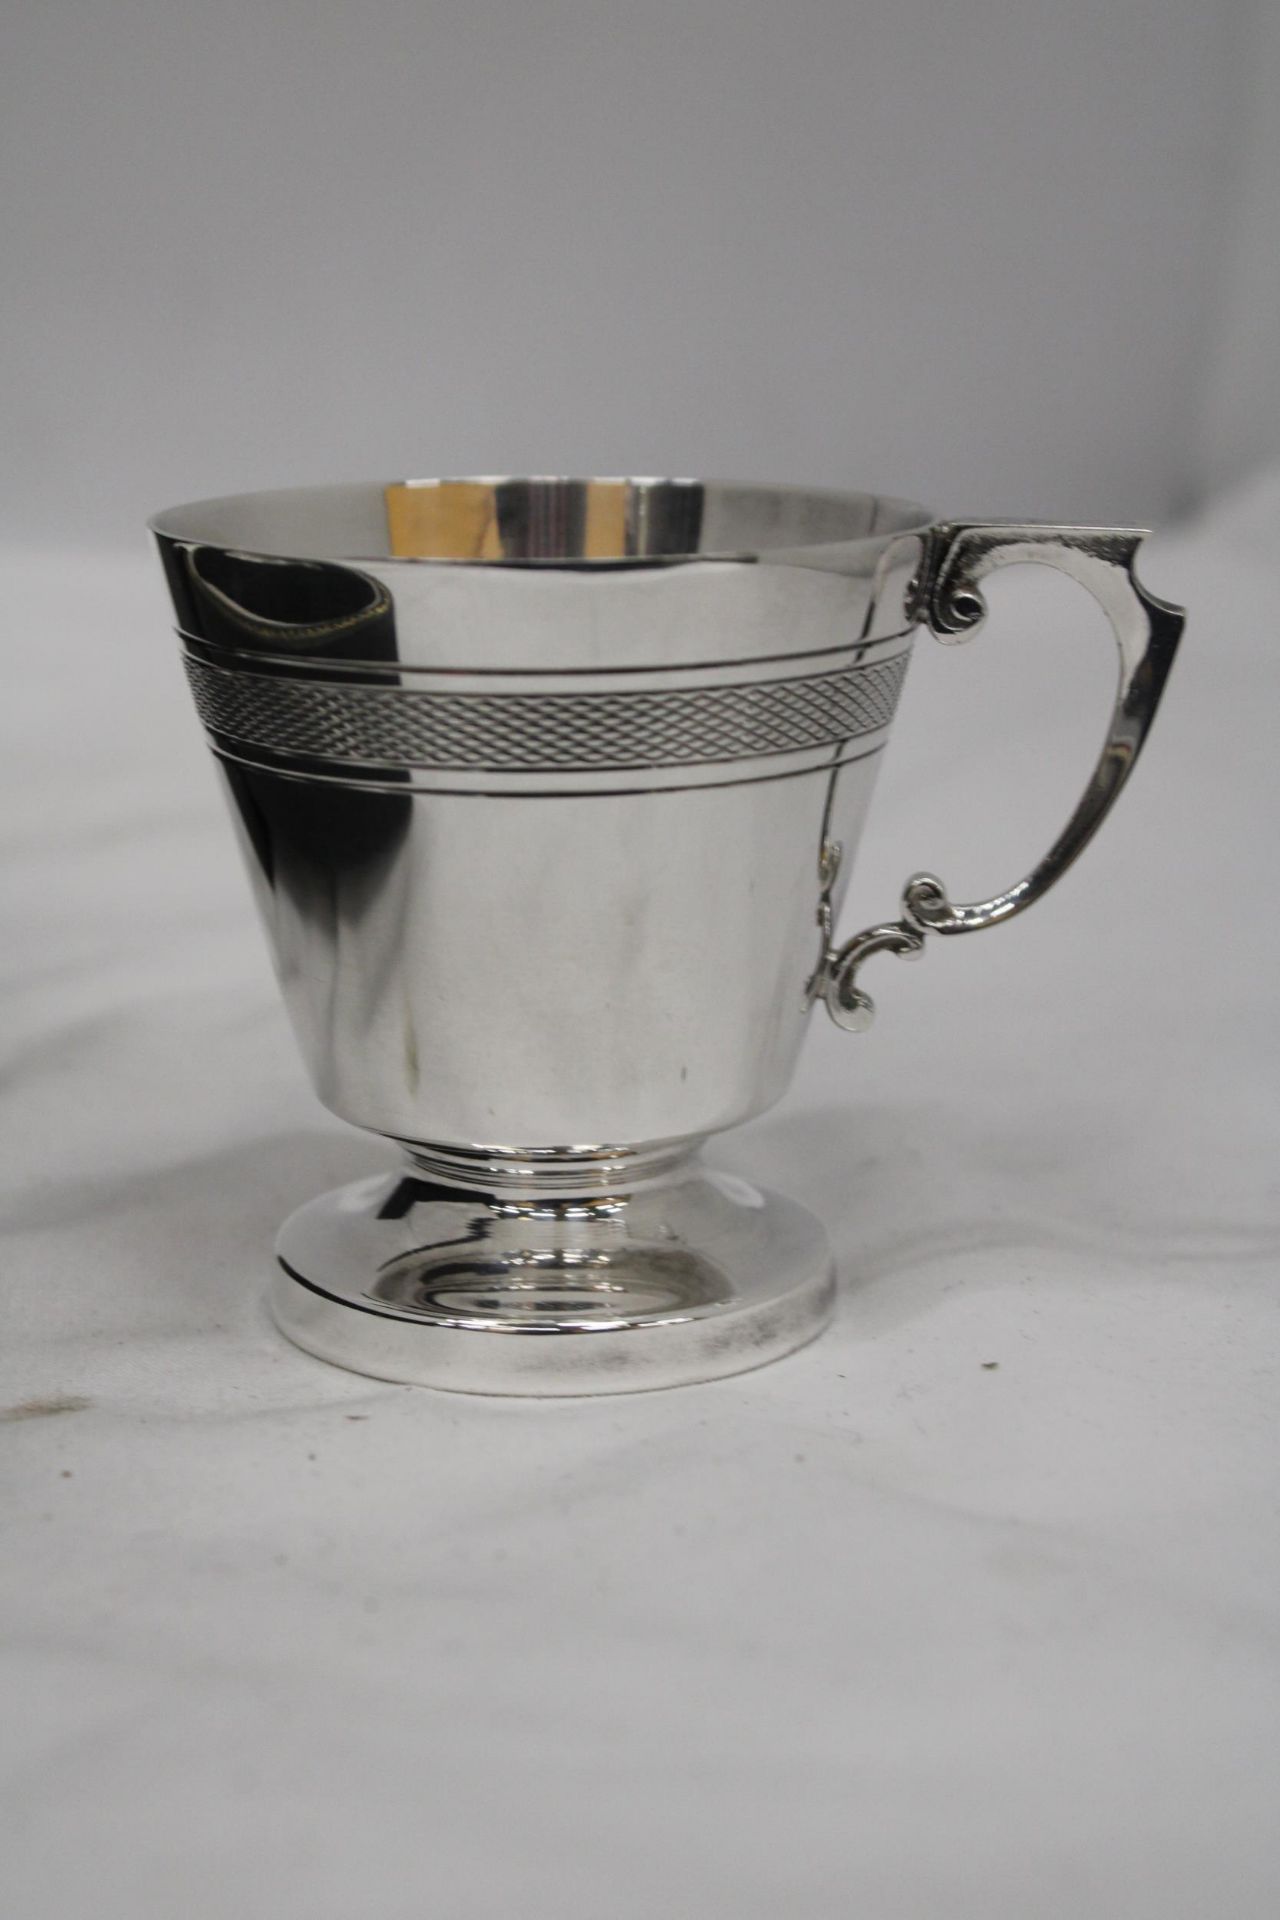 A VINTAGE SILVER PLATED CHRISTENING CUP IN THE ORIGINAL PRESENTATION BOX - Image 5 of 5